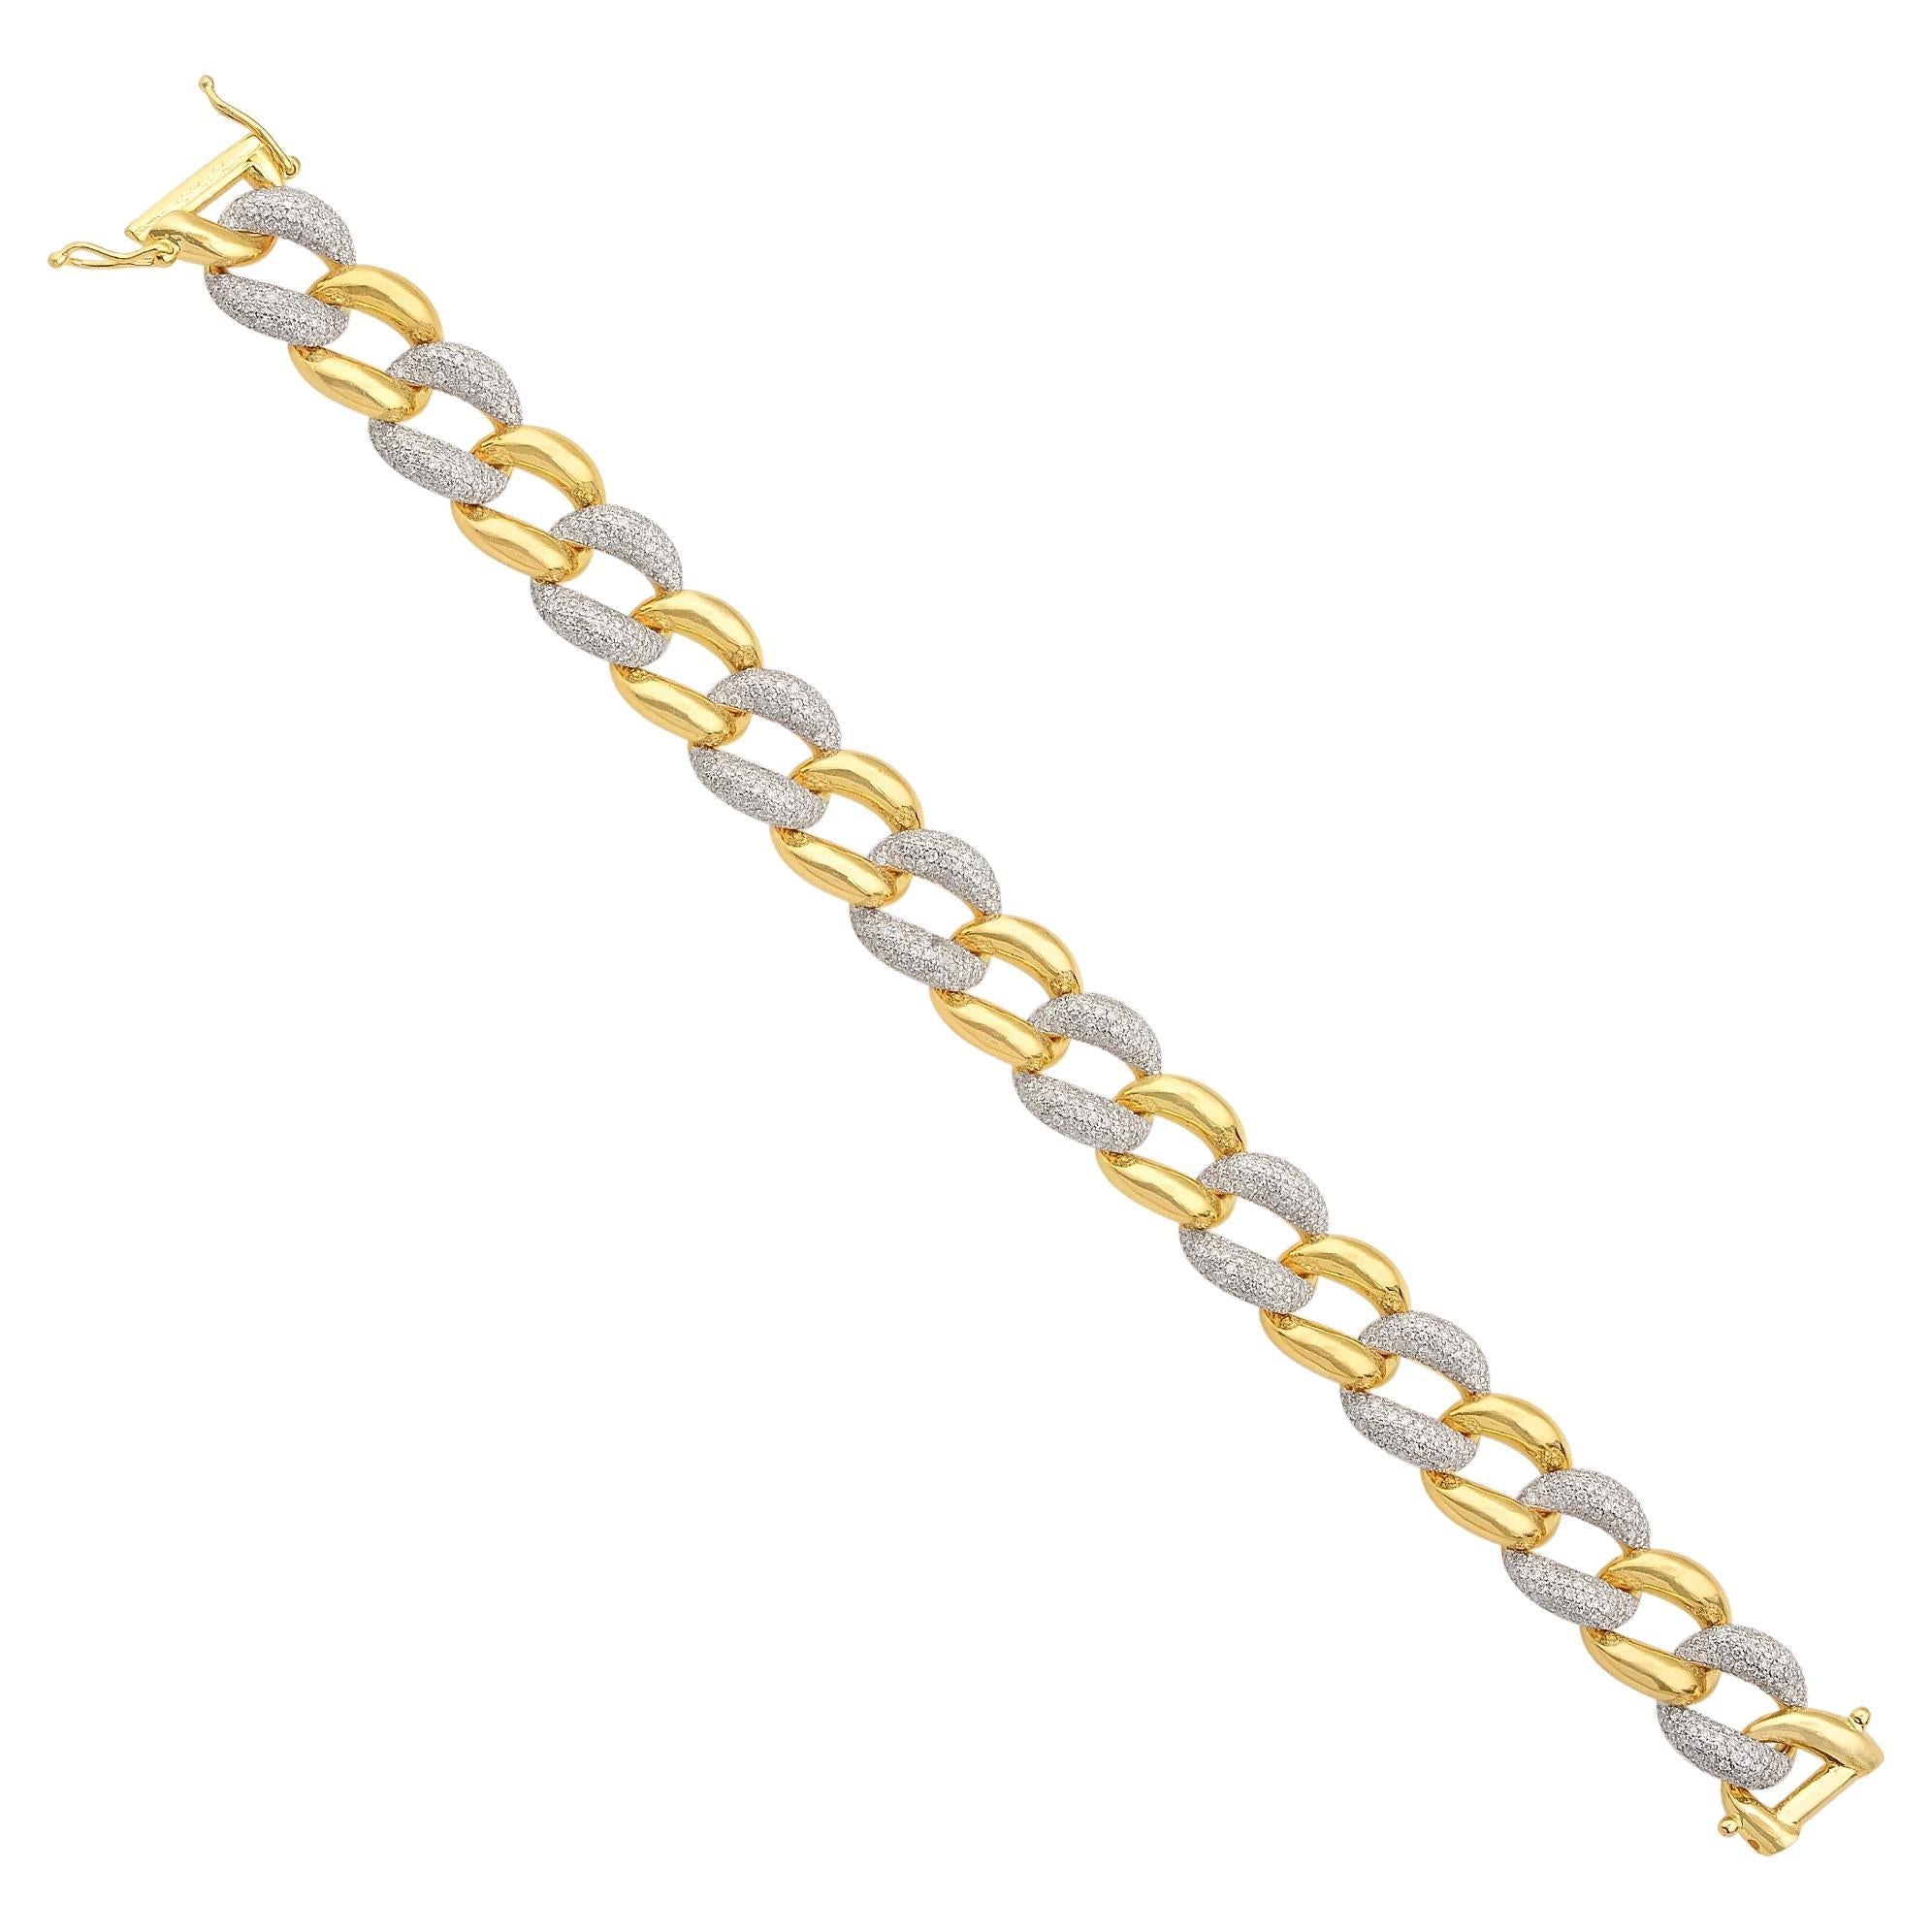 4 Carat SI Clarity HI Color Diamond Link Chain Bracelet 14k Yellow Gold Jewelry For Sale